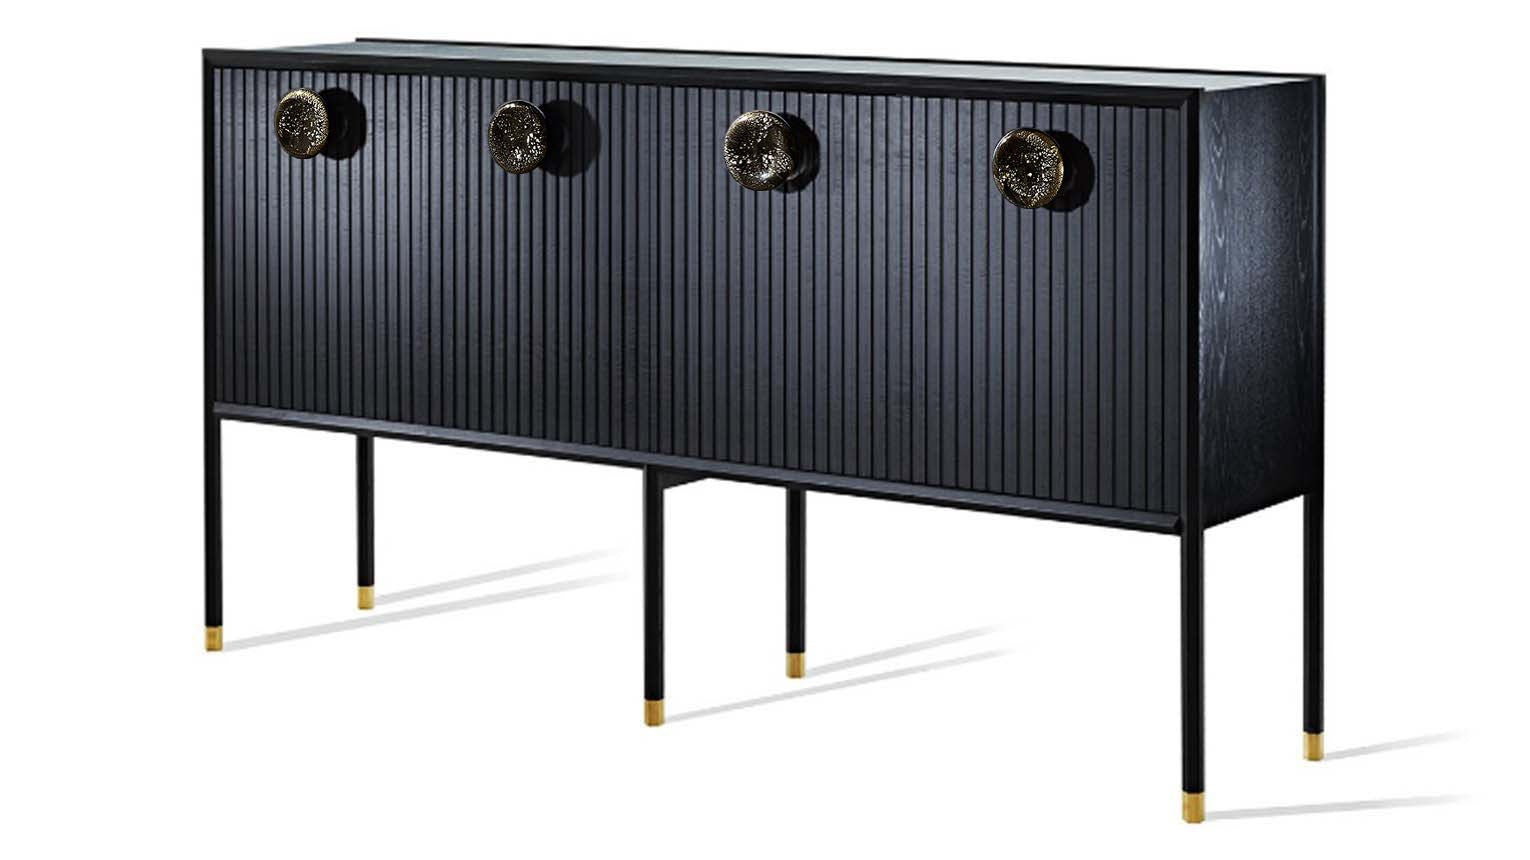 Halo Tall Buffet with Glass handles - Zuster Furniture